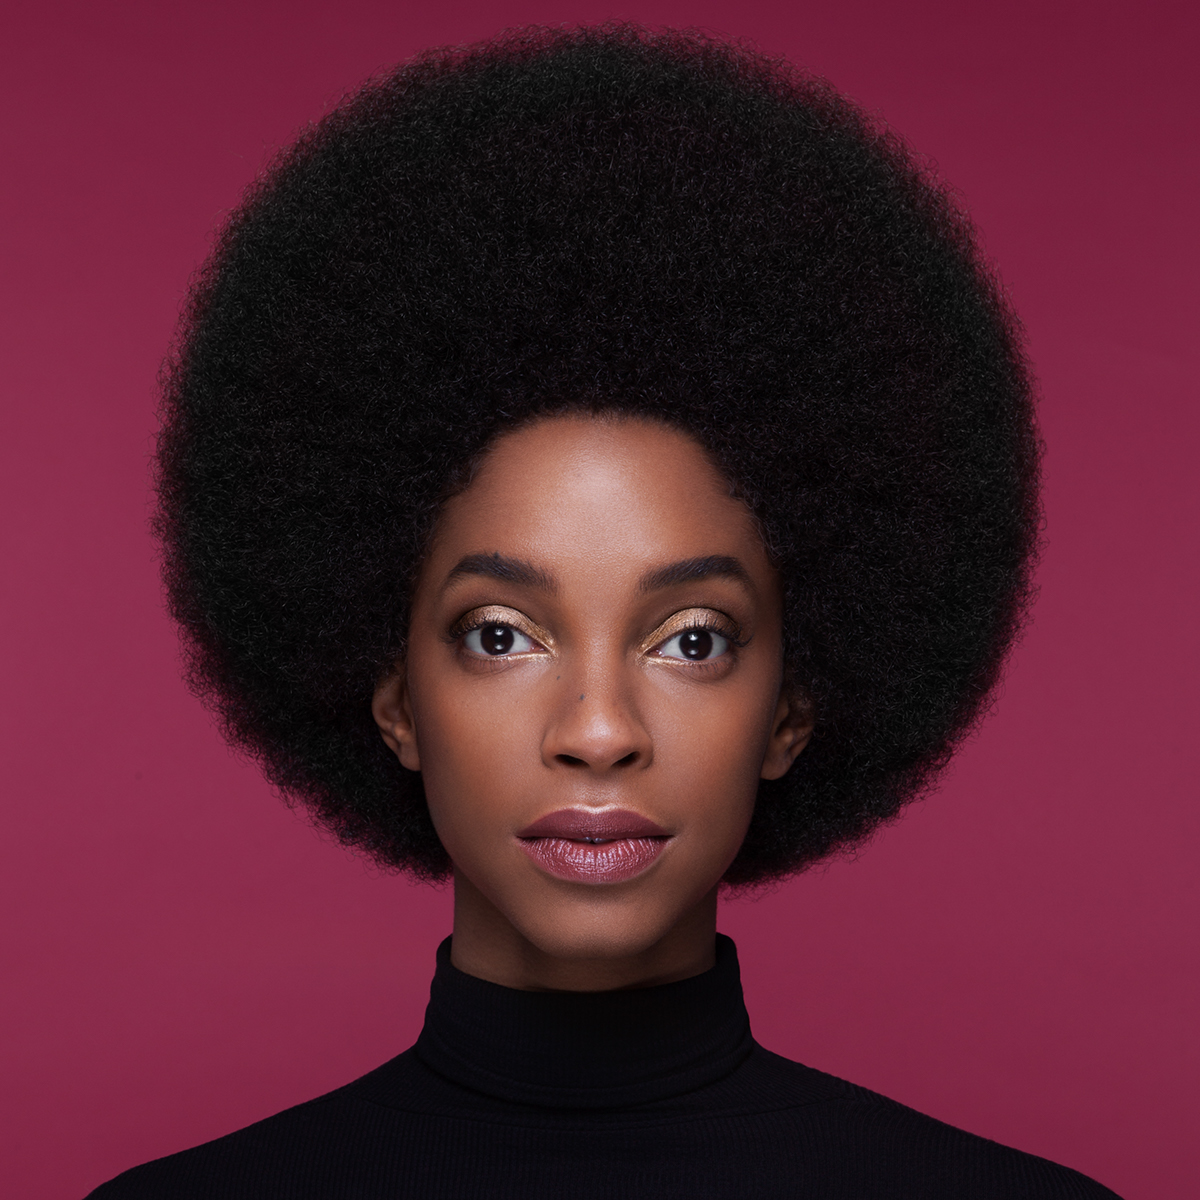 afro afro hair afropunk 70s style beauty Black Beauty cover story.